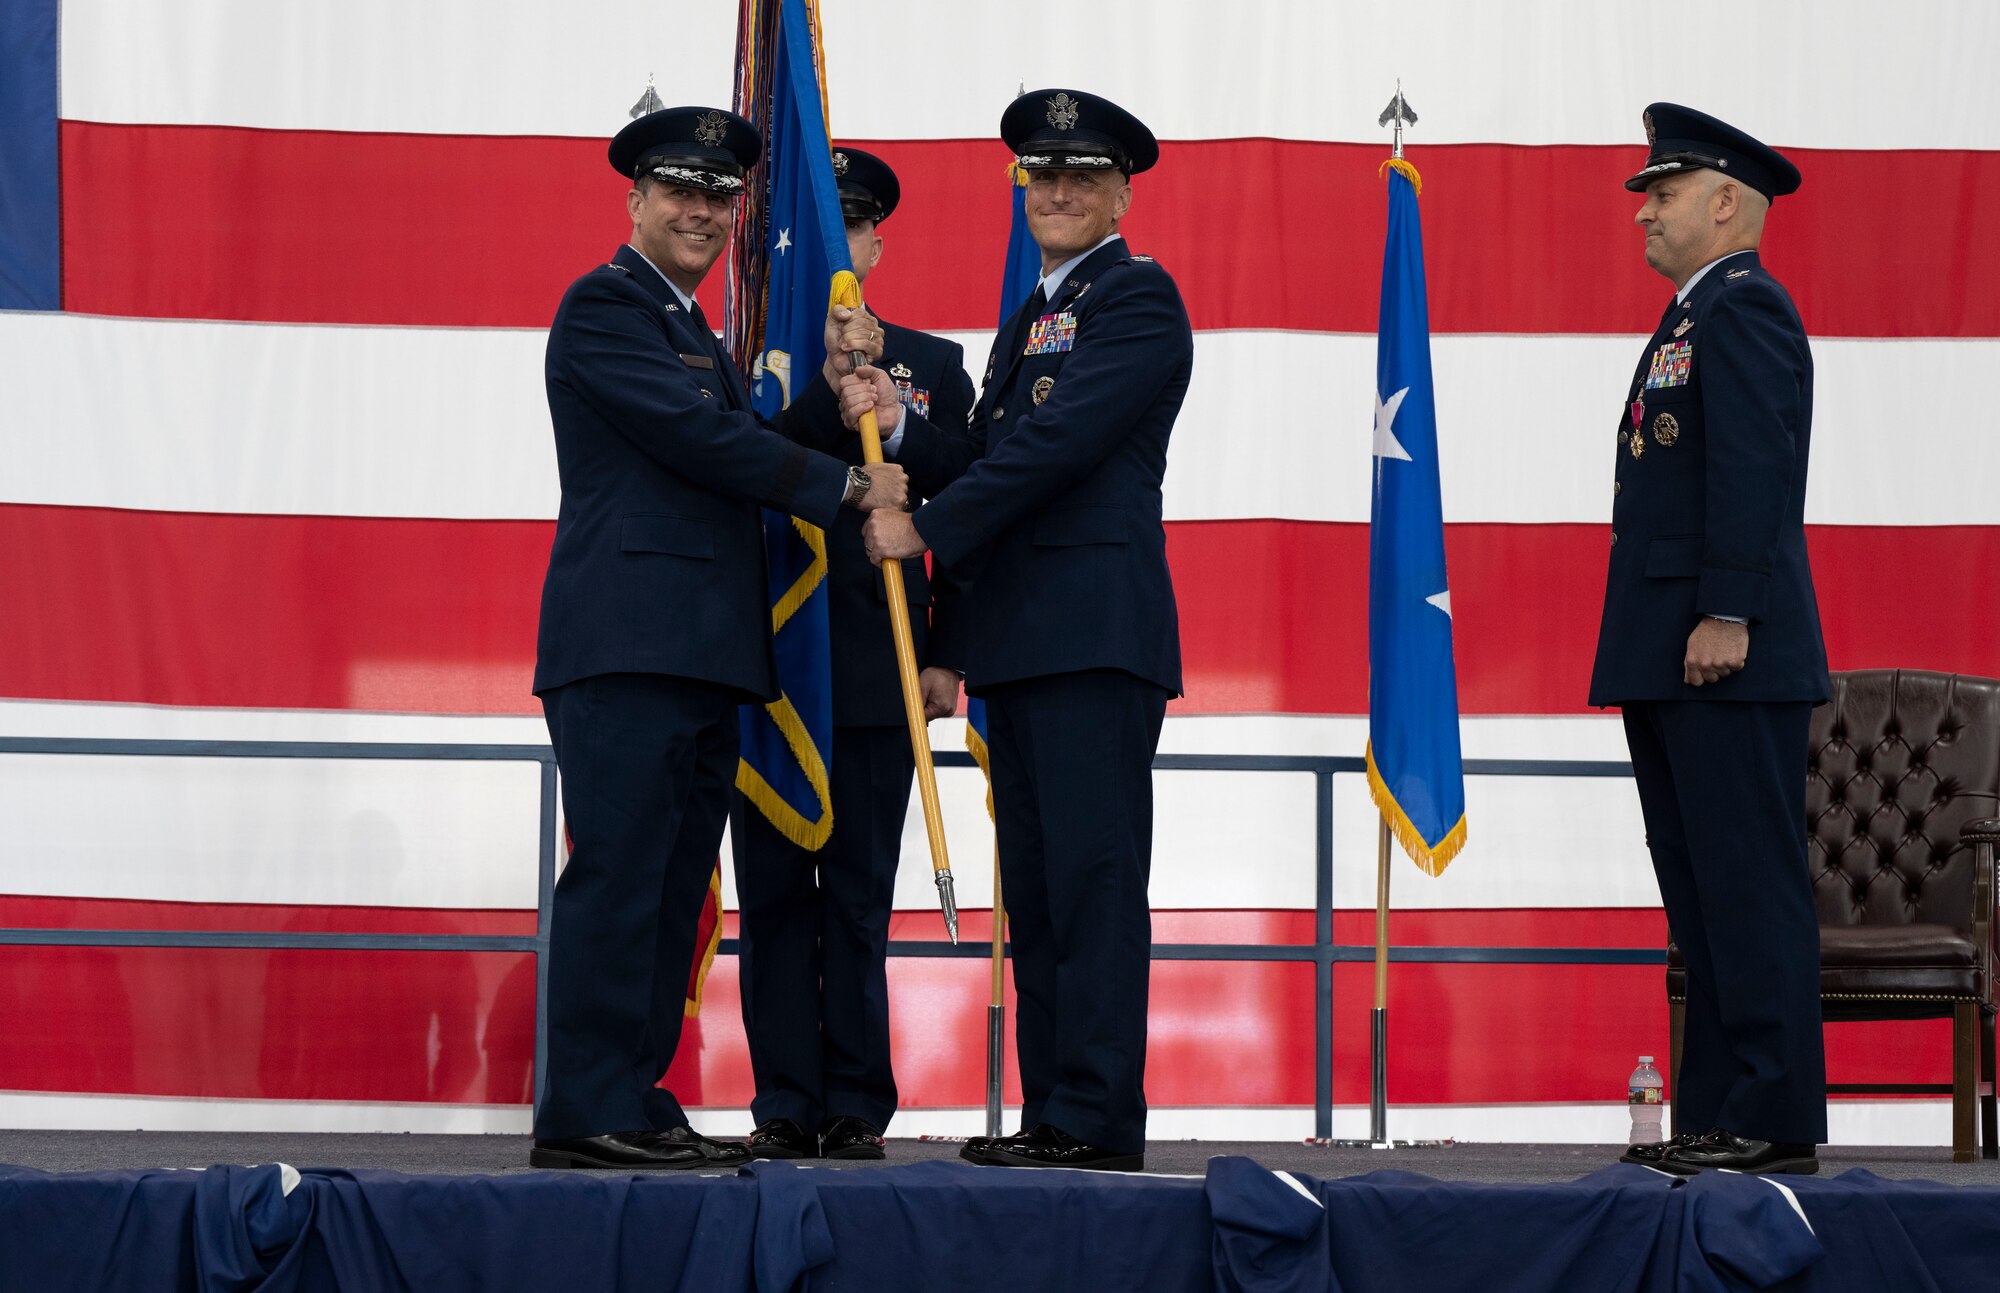 U.S. Air Force Maj. Gen. Andrew J. Gebara, Eighth Air Force and Joint-Global Strike Operations Center commander, left, presents the 28th Bomb Wing guidon to Col. Derek C. Oakley, incoming 28th BW commander, center, during a change of command ceremony at Ellsworth Air Force Base, South Dakota, June 23, 2023.